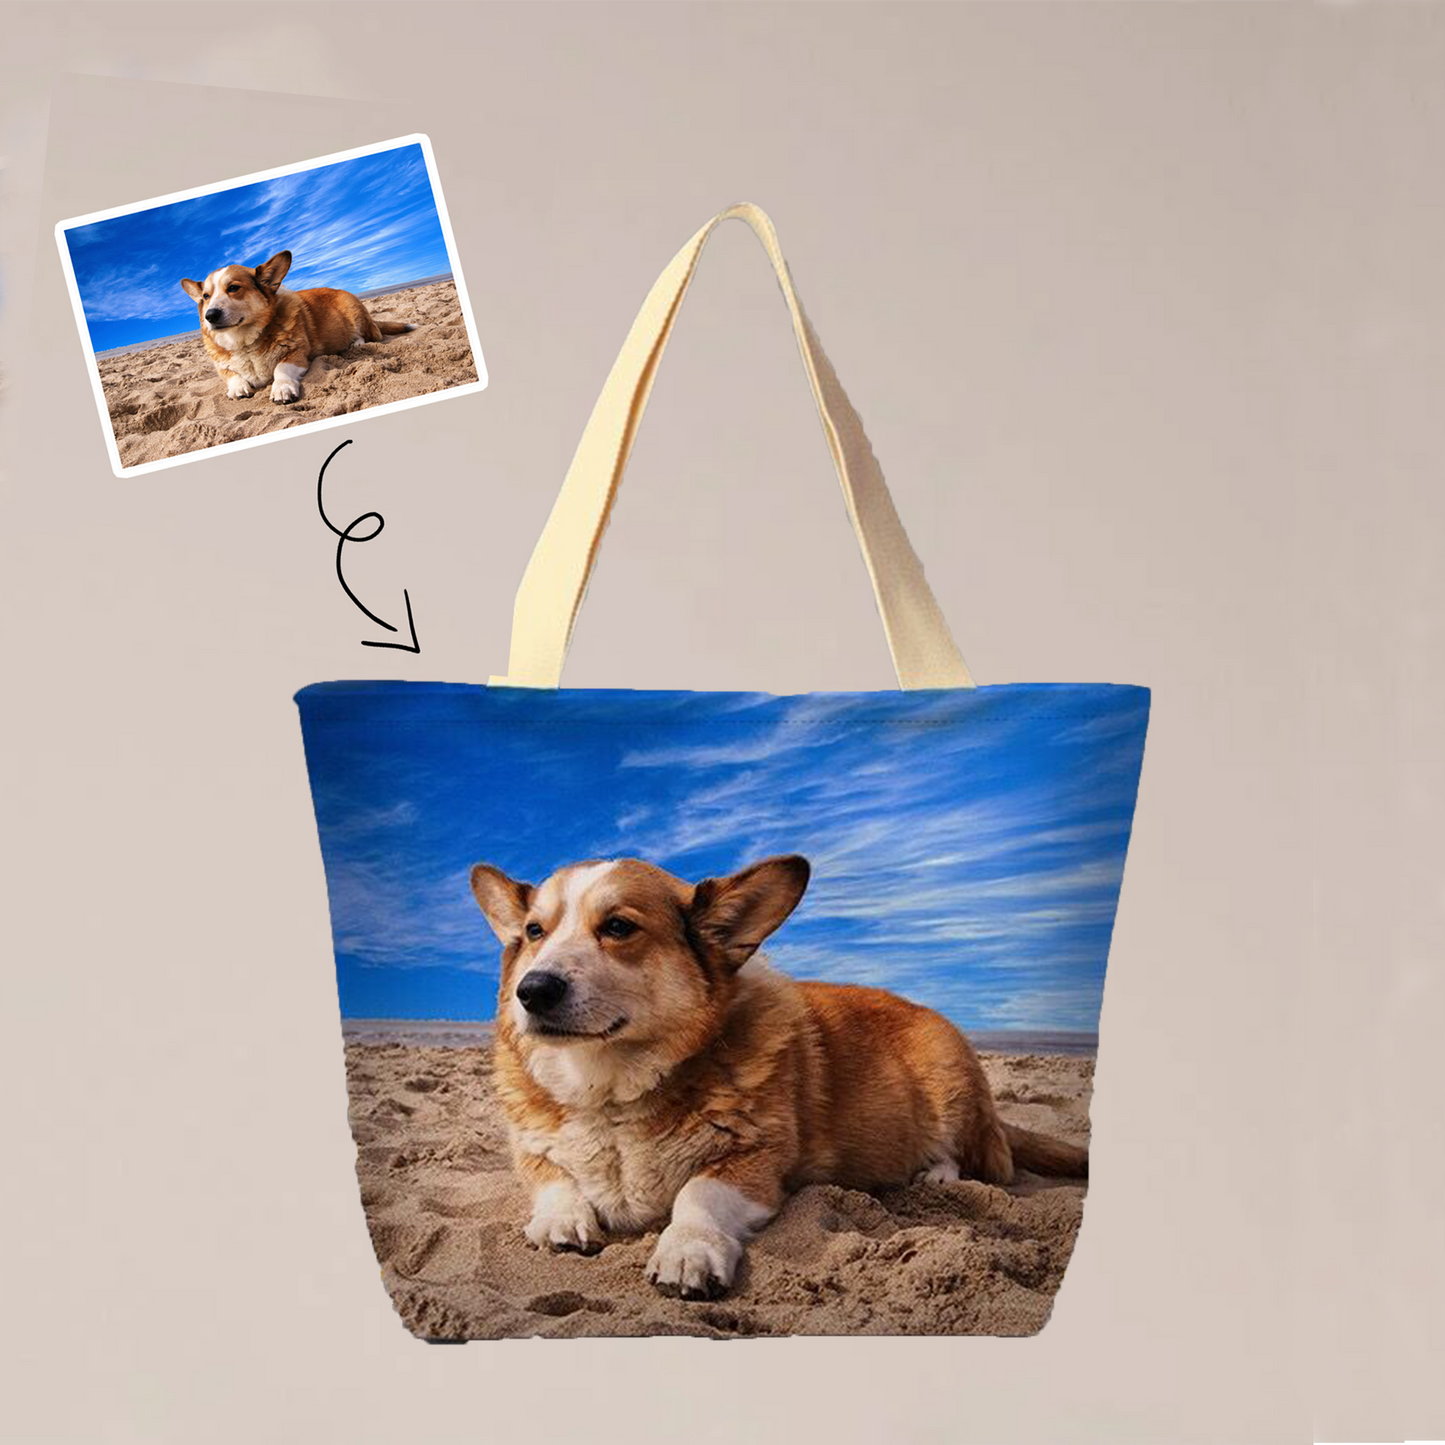 A all over print custom tote bag with a photo of a dog under the blue sky is a thoughtful and unique gift. The bag is large and the photo is vibrant, making it a conversation starter.